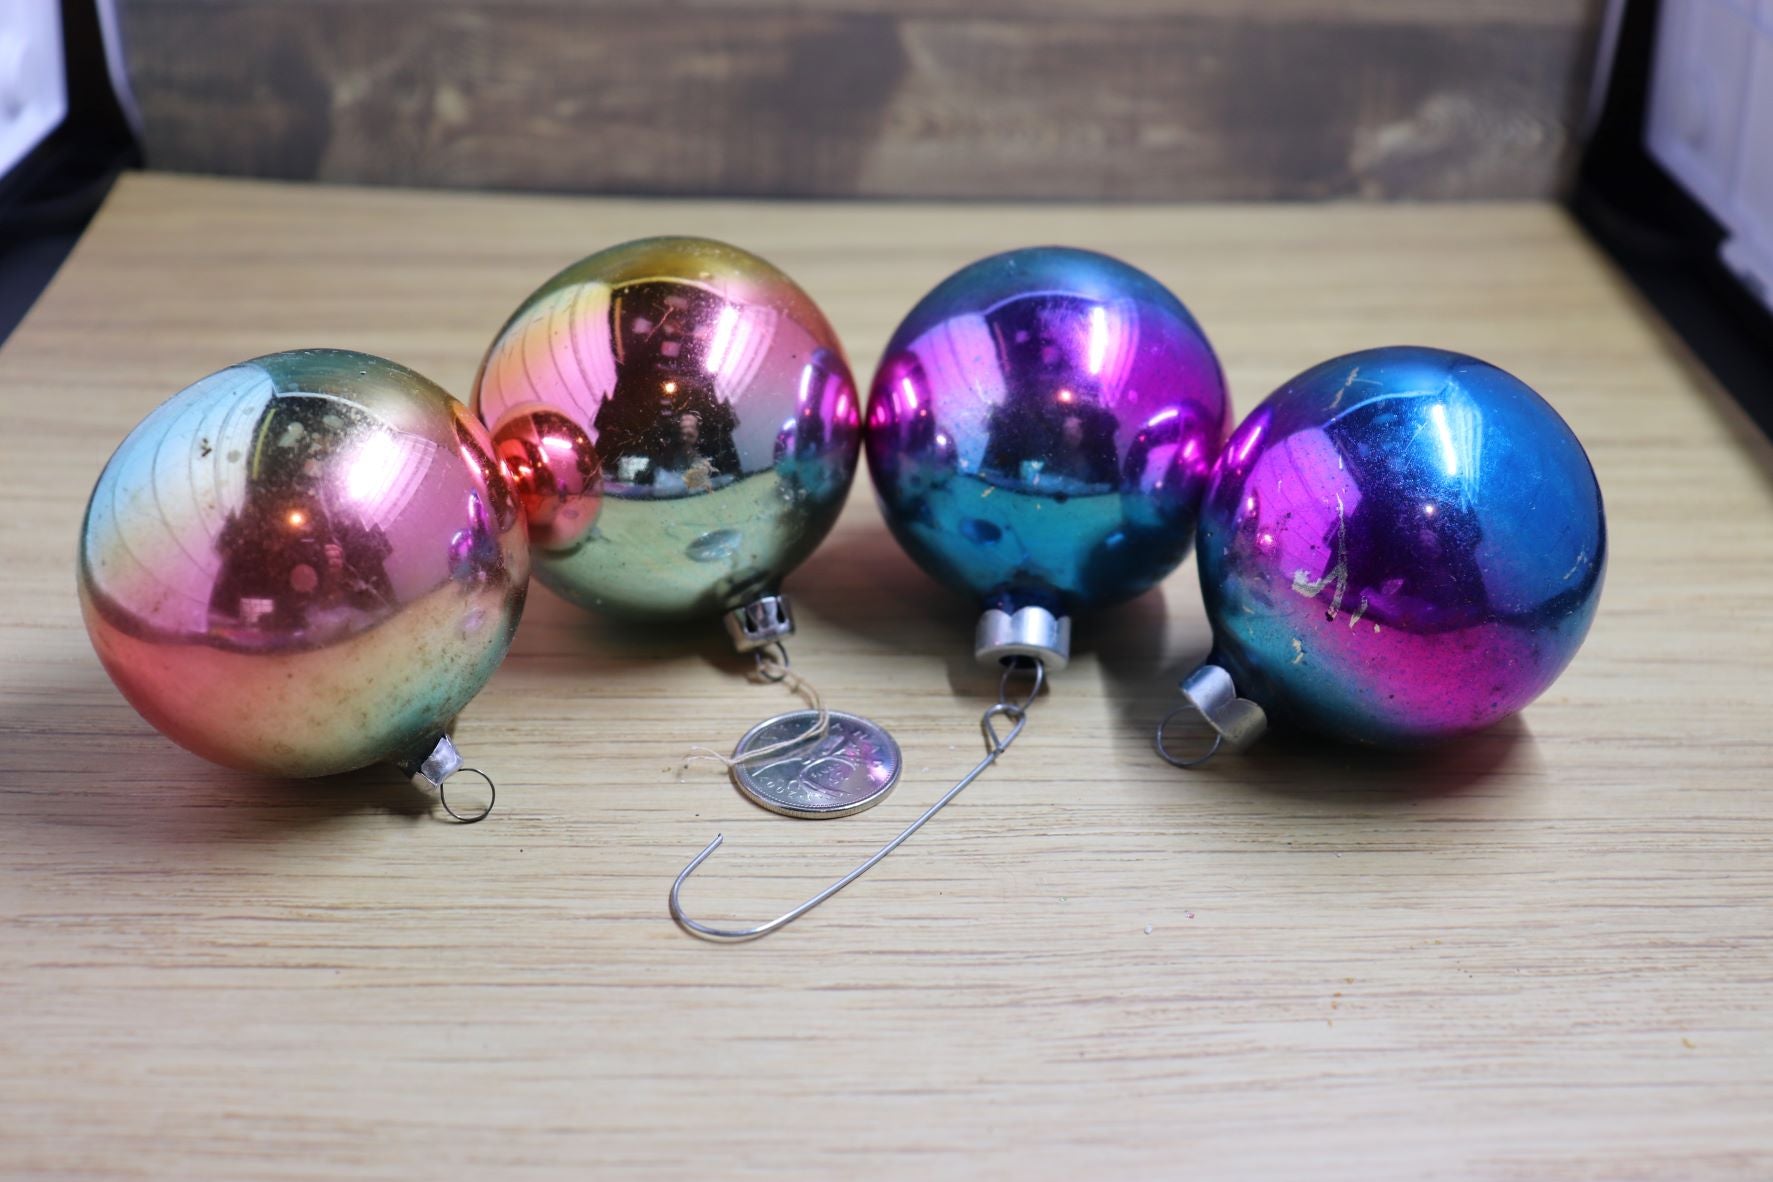 Lot of 4 Vintage Ombre-Like Ball Ornaments